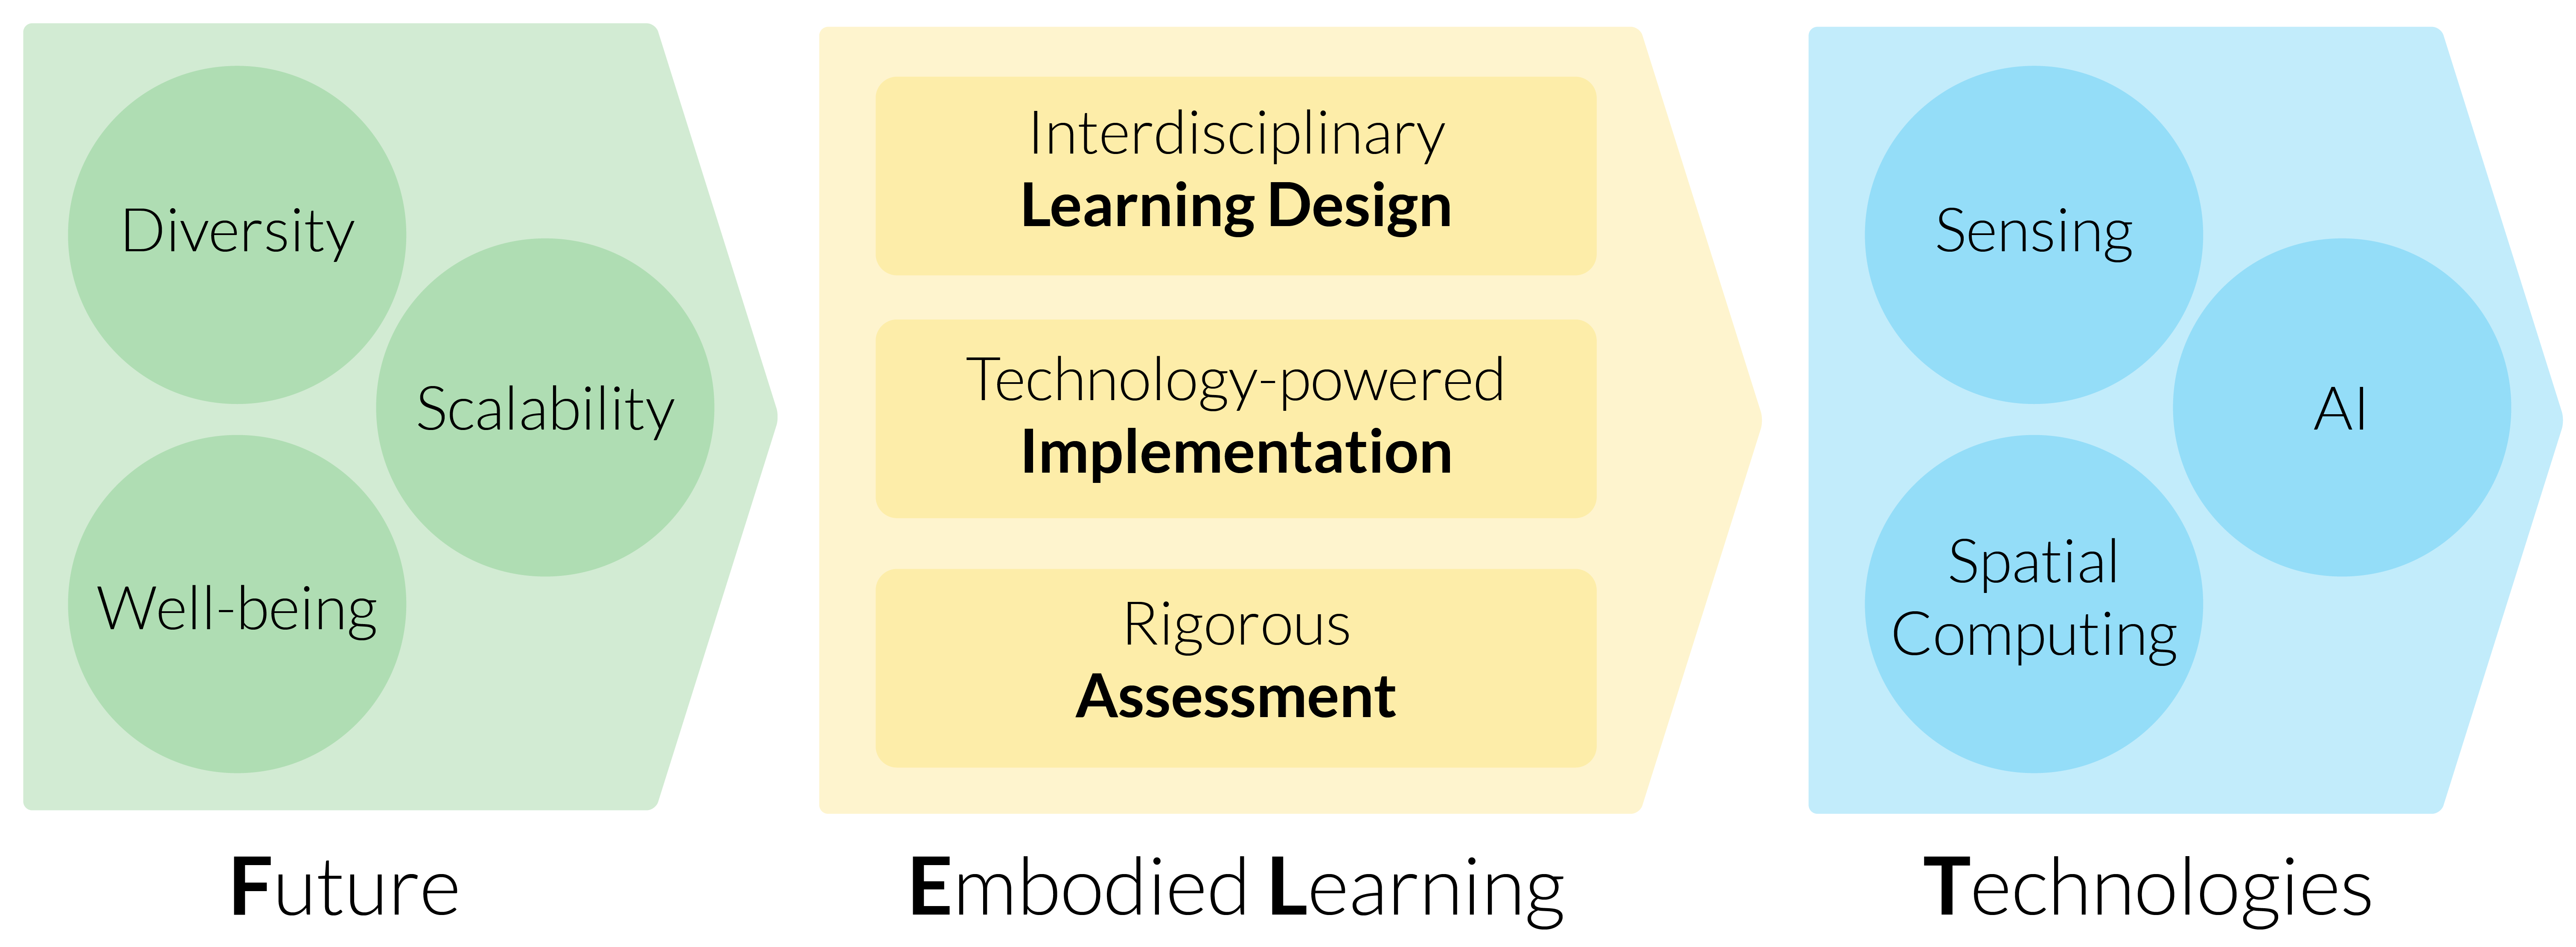 A process including three lenses, diversity, well-being, and scalability. Three steps, including interdisciplinary learning design, technology-powered implementation, and rigorous assessment. And three technologies, including sensing, spatial computing, and AI.